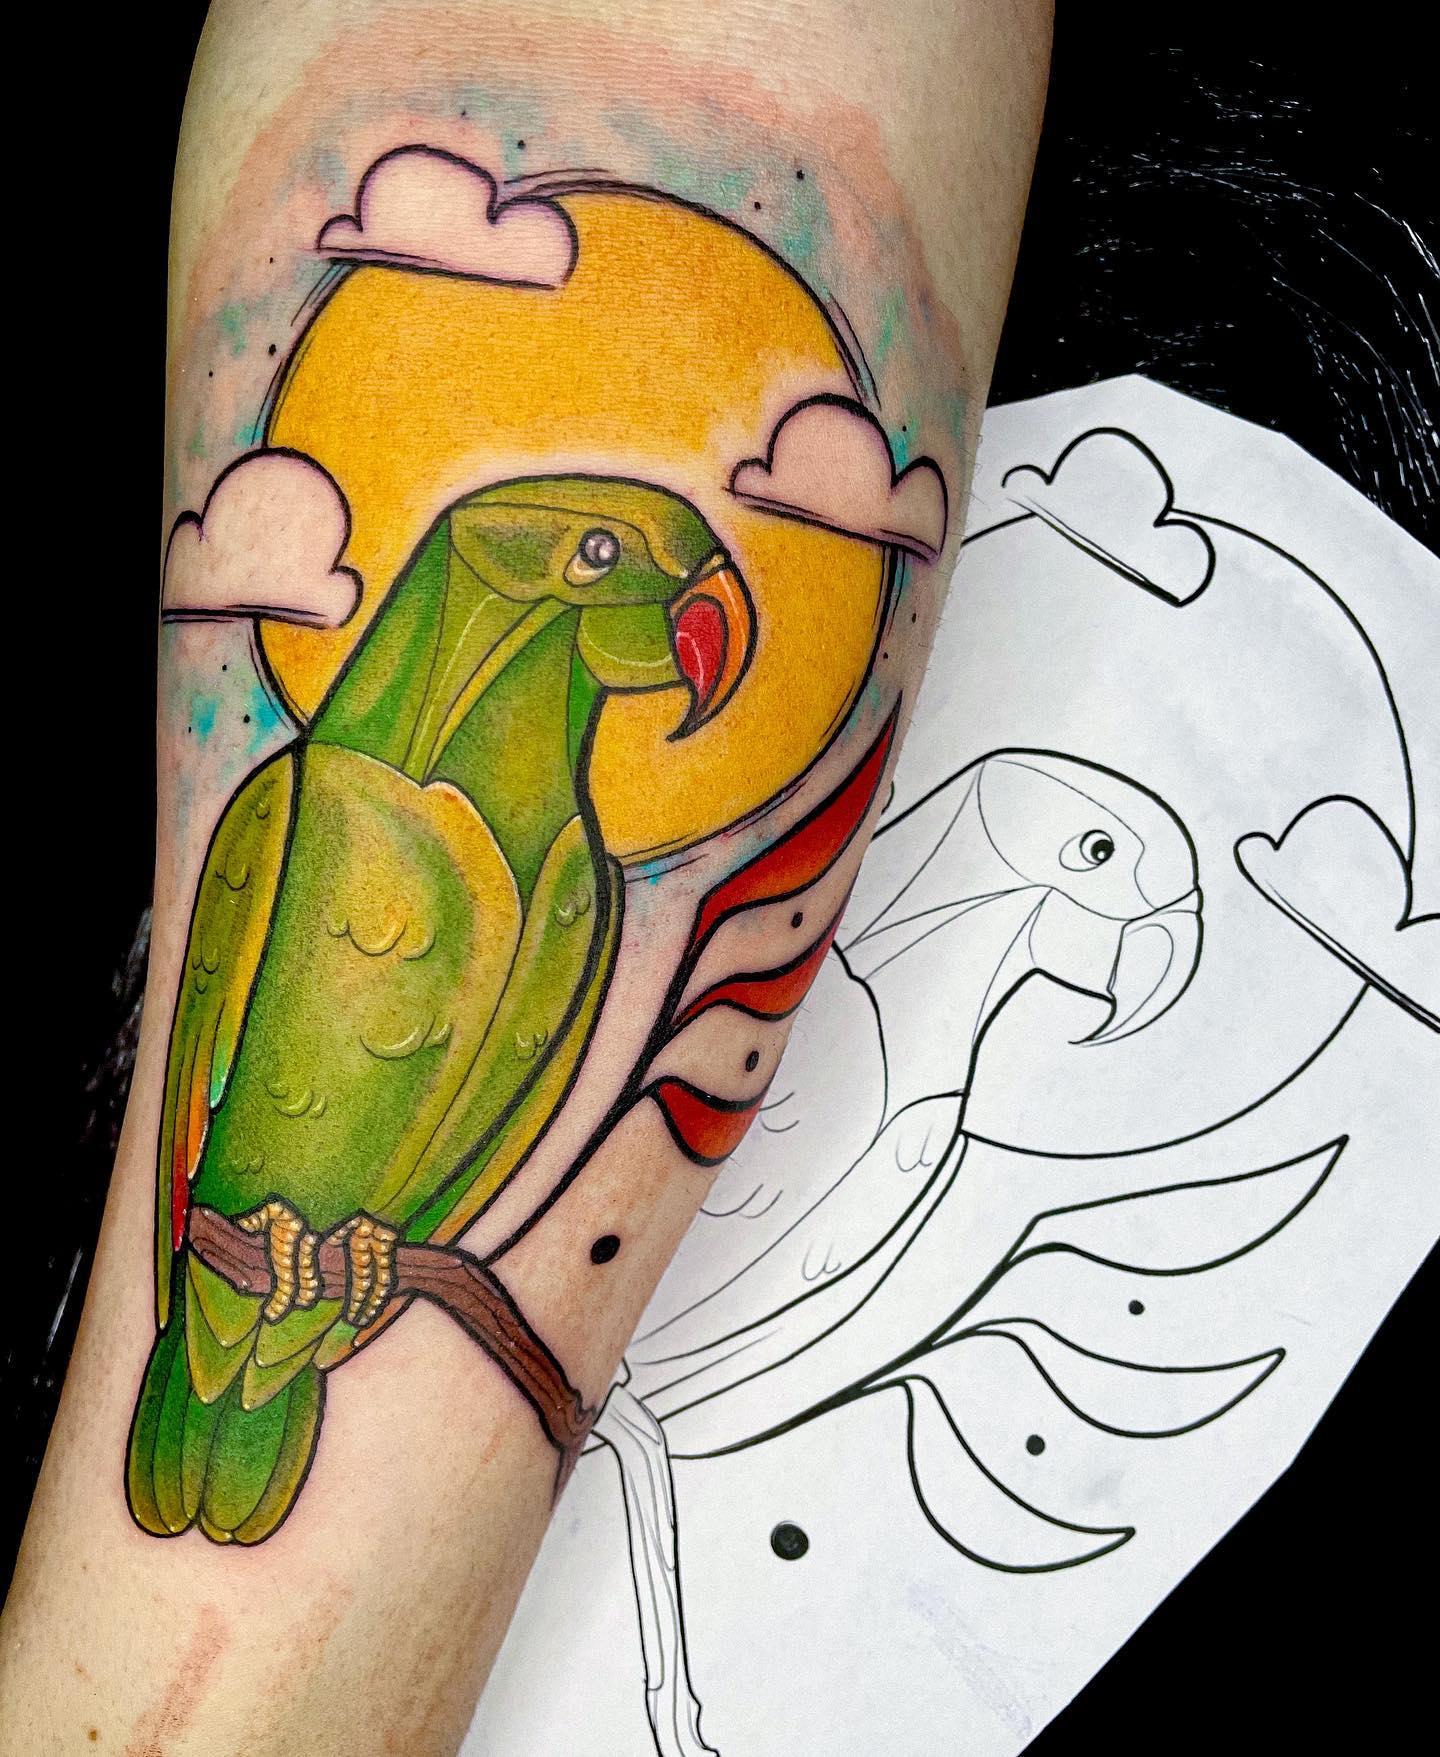 Le parrot 🦜 for tomphillips.19 
Done at studioxiiigallery 

                             